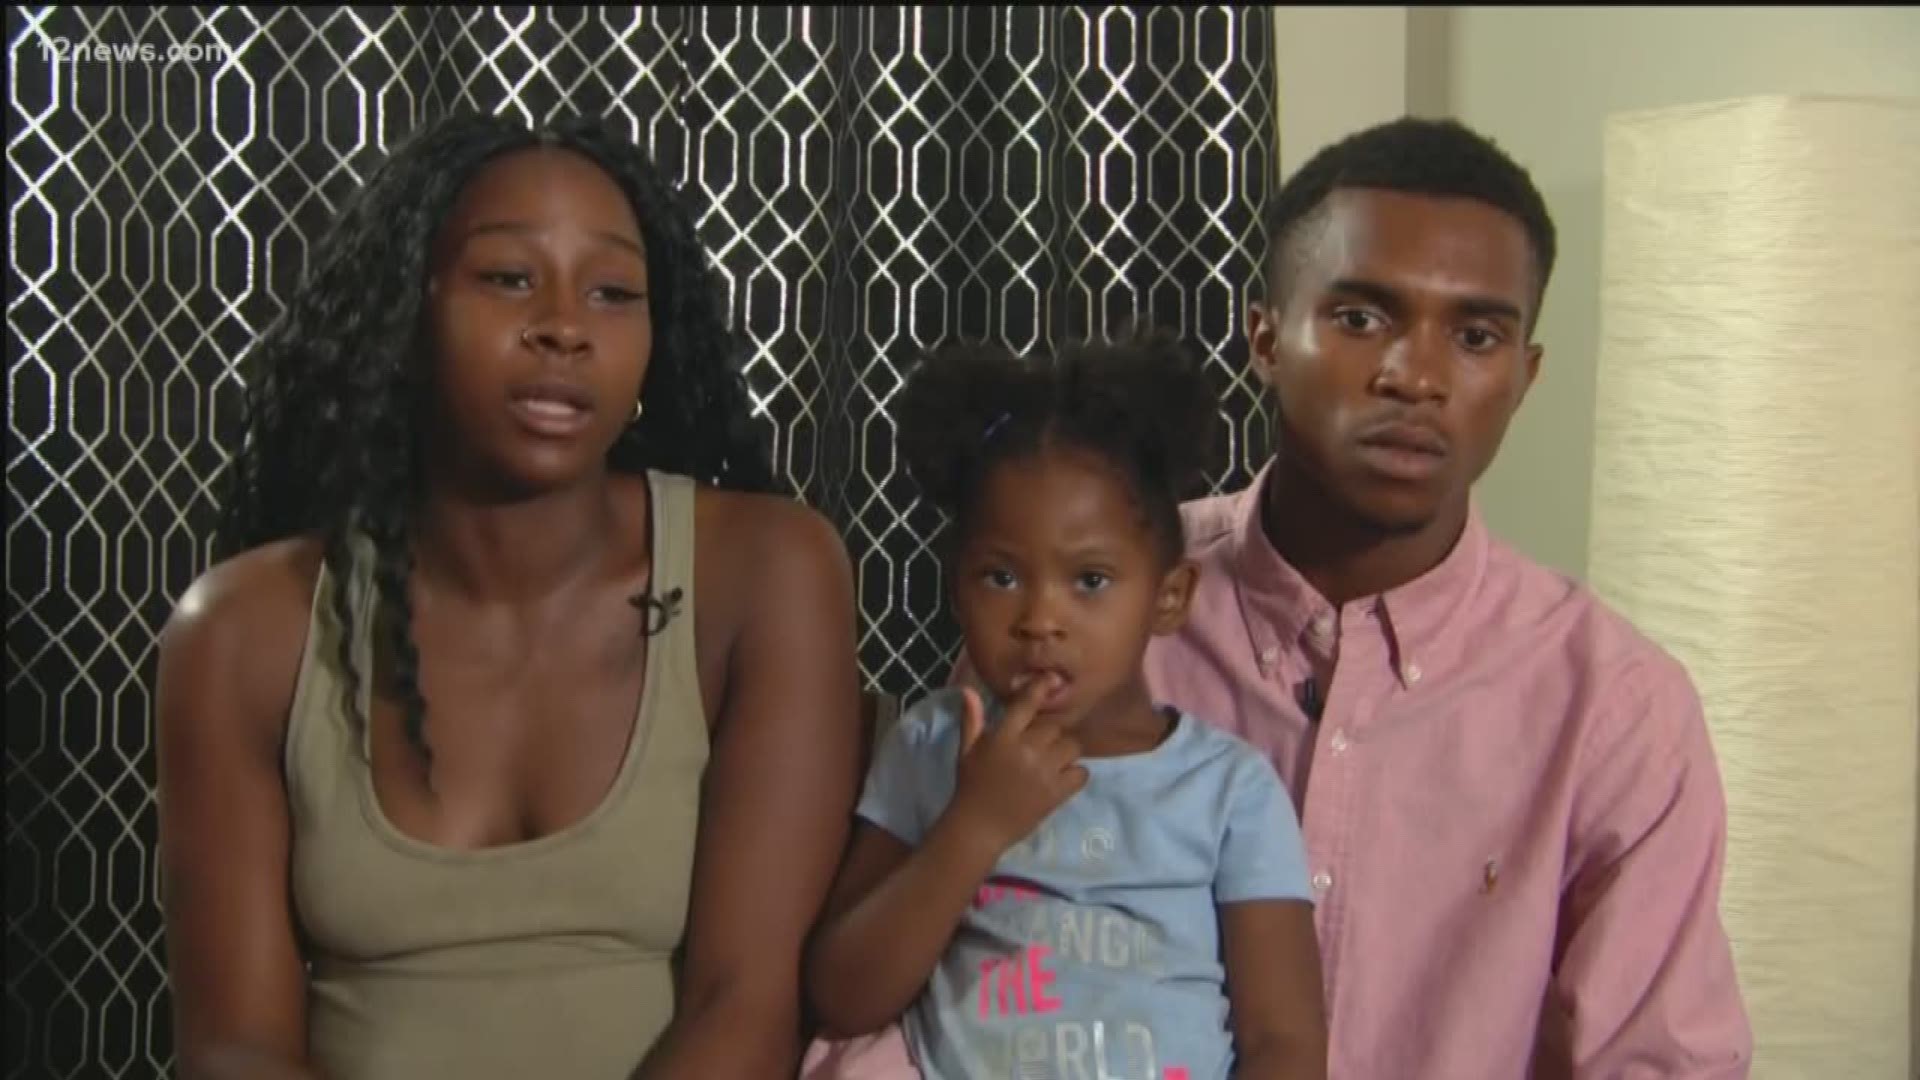 The young black family at the center of a reported police brutality incident that stemmed from the alleged shoplifting of a doll is speaking out.